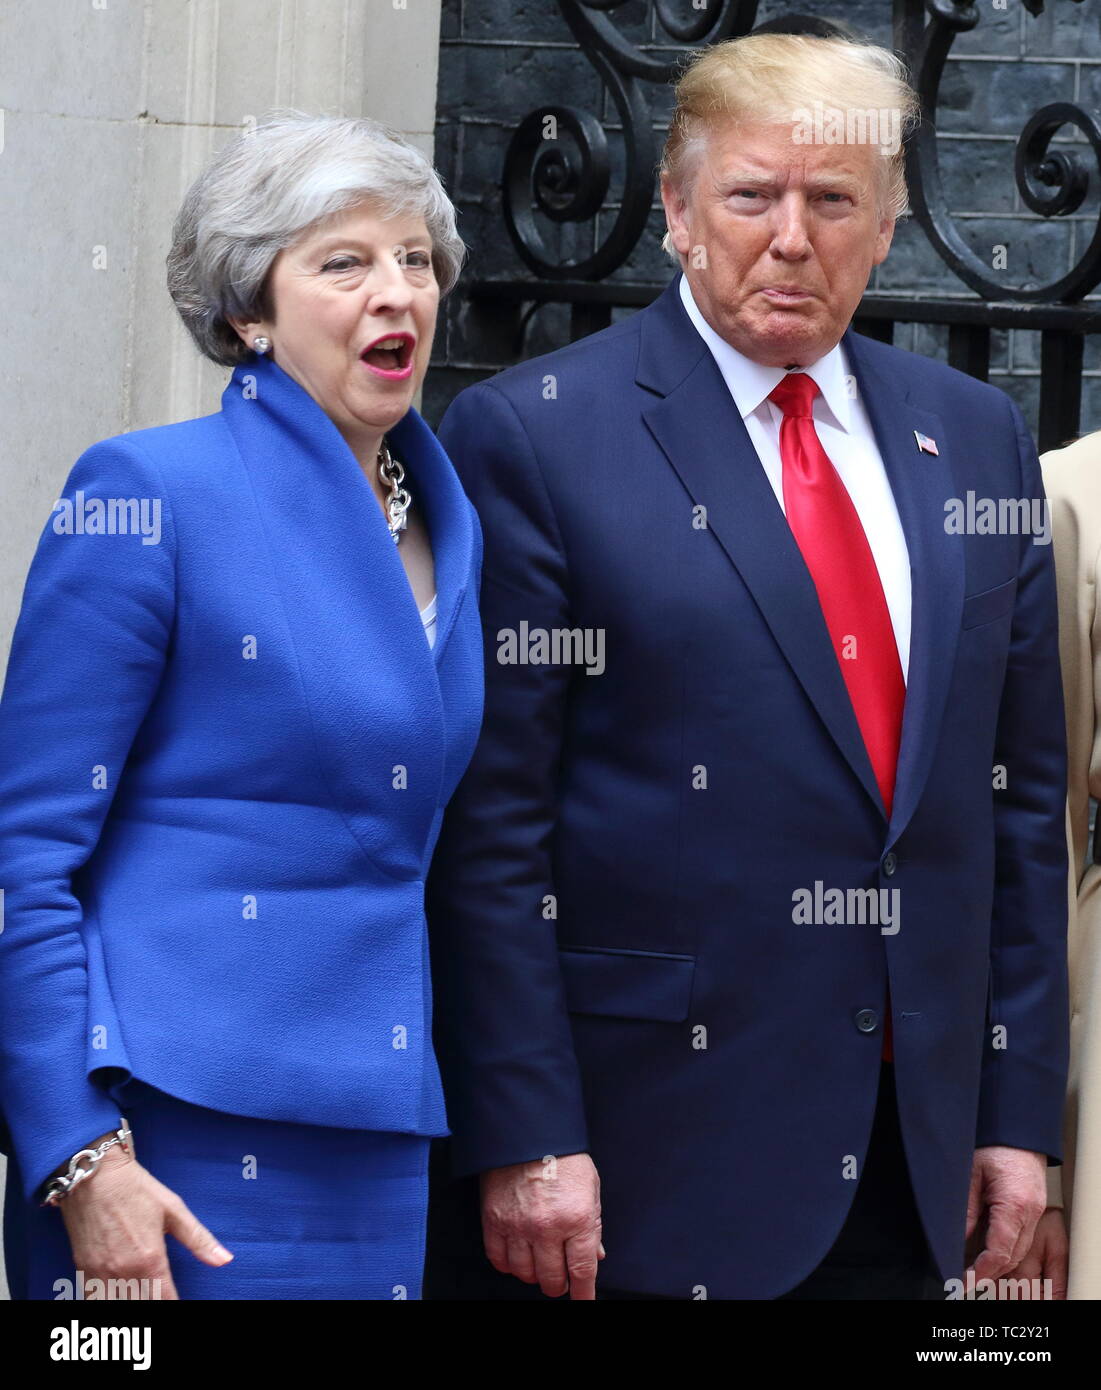 London, UK. 04th June, 2019. US President Donald Trump and British Prime Minister Theresa May seen outside No 10 Downing Street on the second day of the State Visit to the UK. Credit: SOPA Images Limited/Alamy Live News Stock Photo